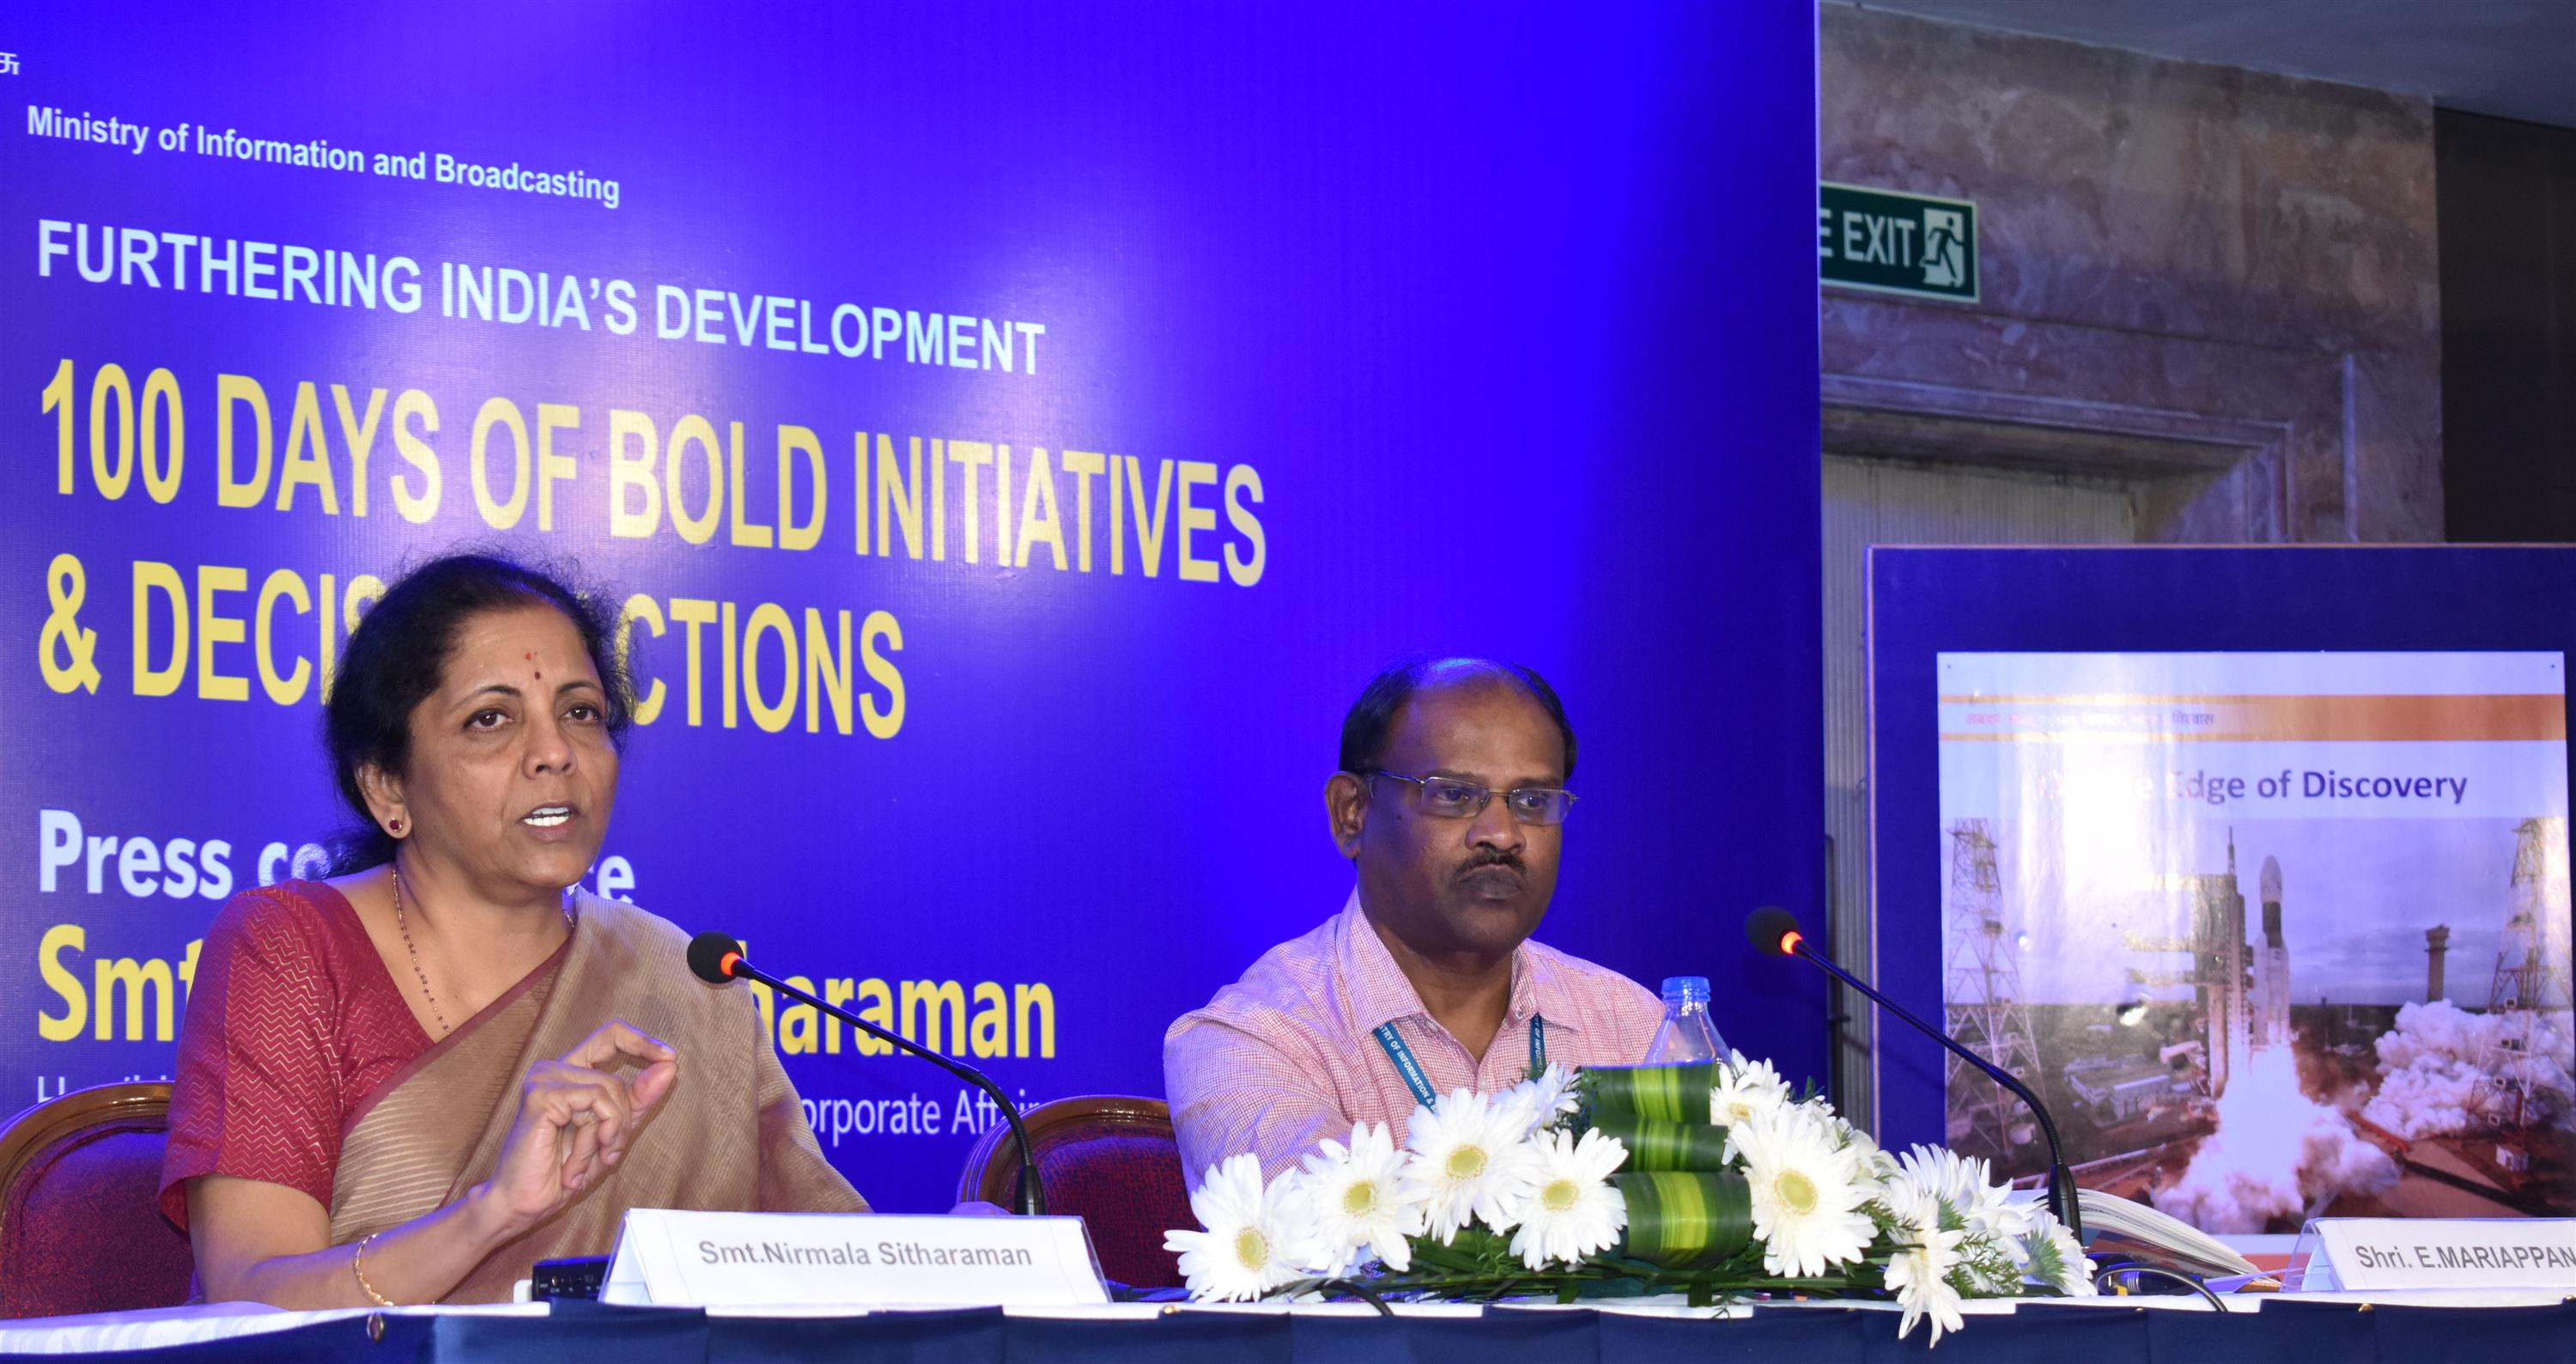 Smt. Nirmala Sitharaman, Union Minister for Finance and Corporate Affairs addressing the media on Furthering India’s Development - 100 Days of Bold Initiatives & Decisive Actions of the Government of India at Chennai today (10.09.2019)